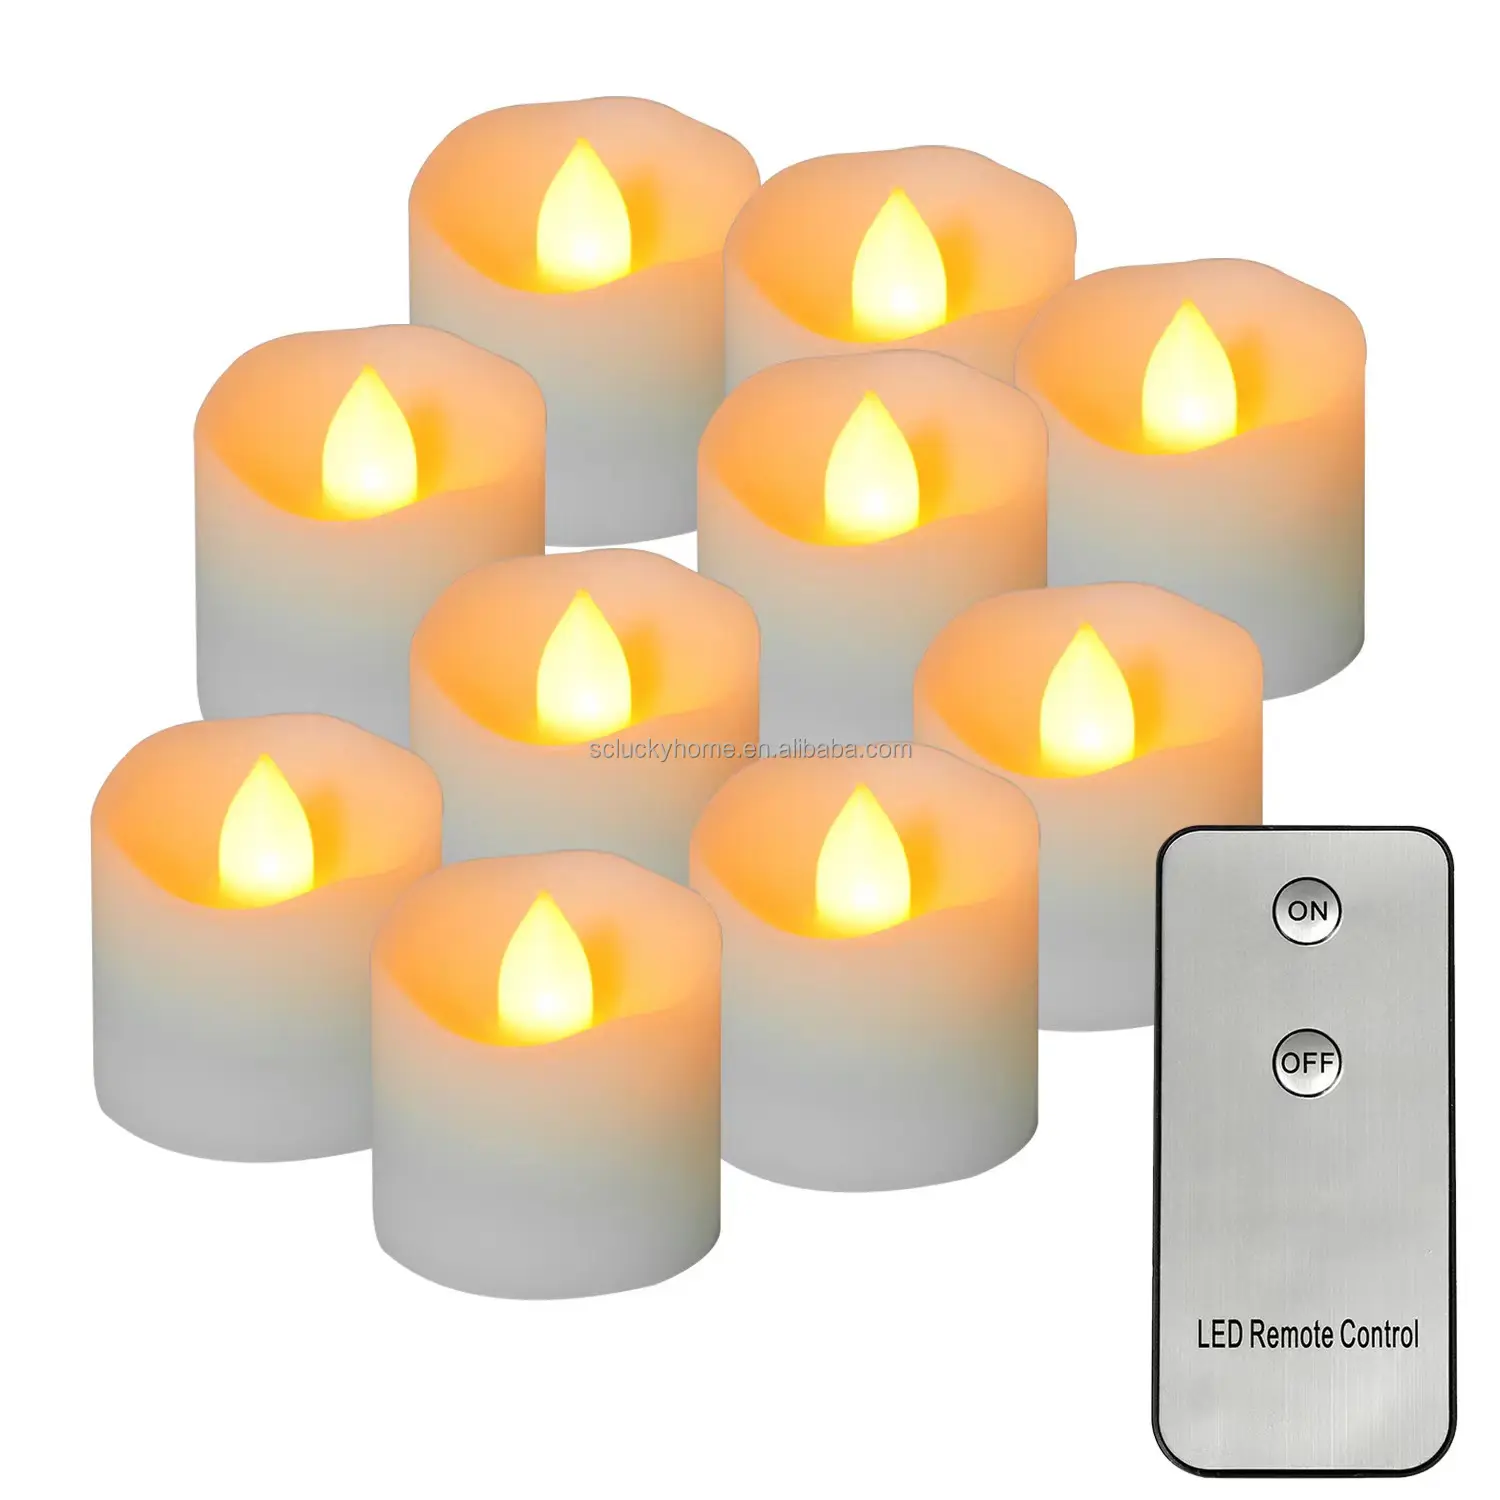 Hot selling Safety Colorful Decorative Mini Plastic Flameless Button Battery LED Tealight Candles For Birthday Party Wedding